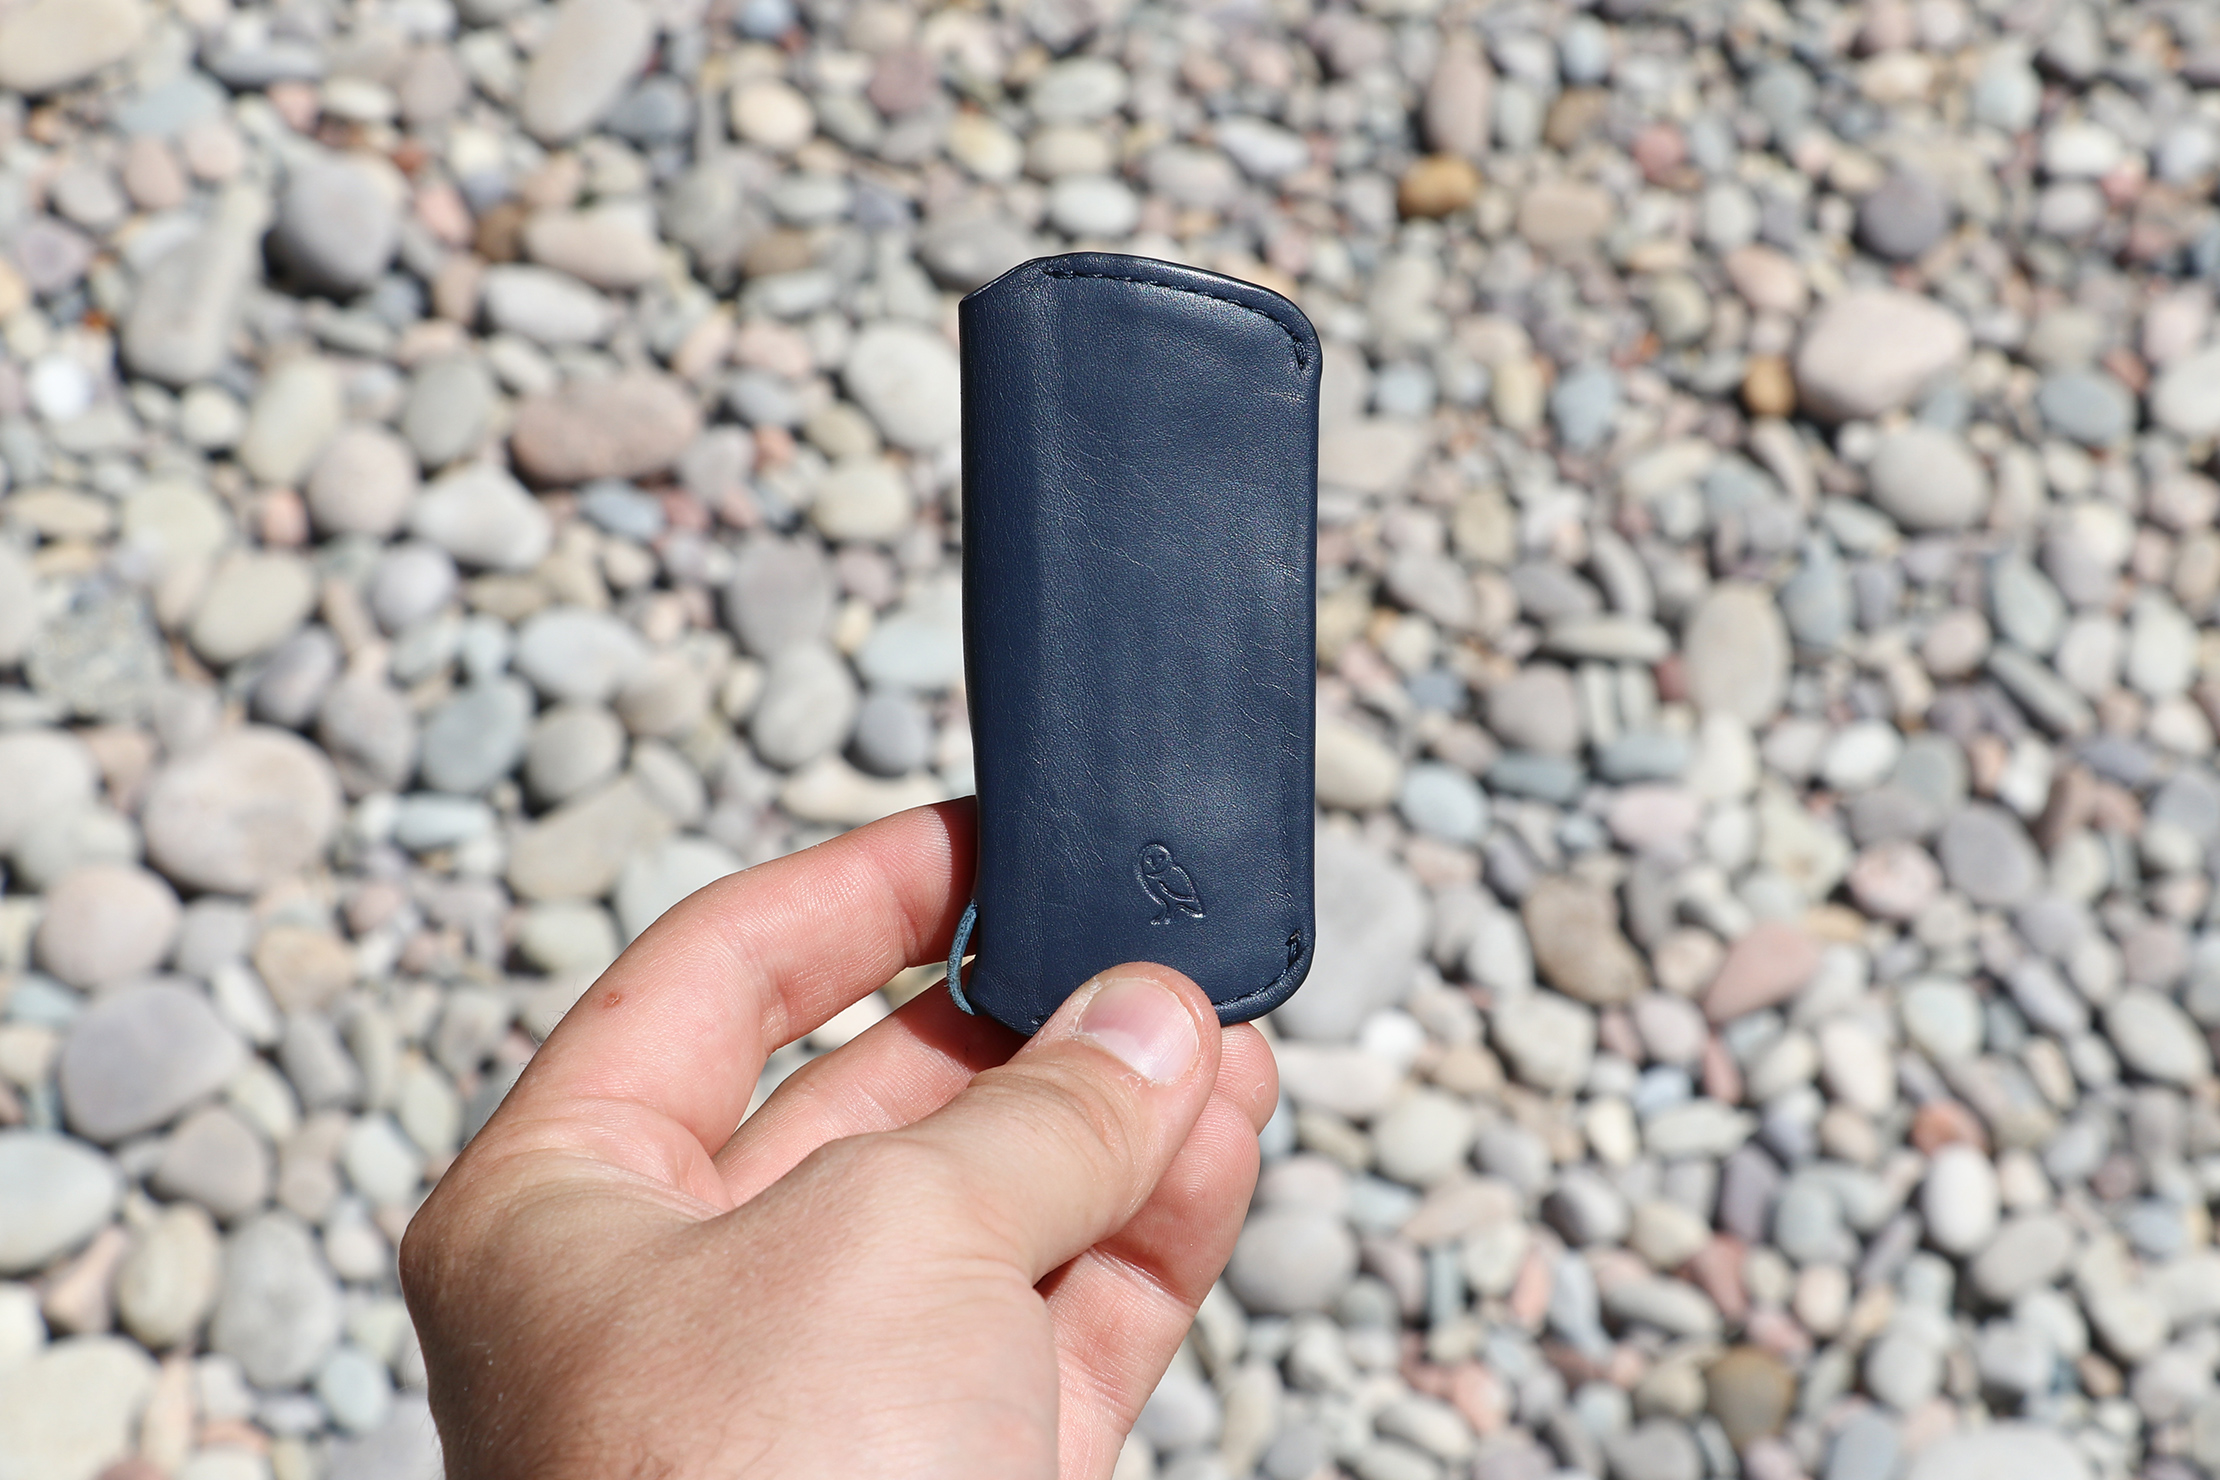 Bellroy Key Cover Plus In Essex England